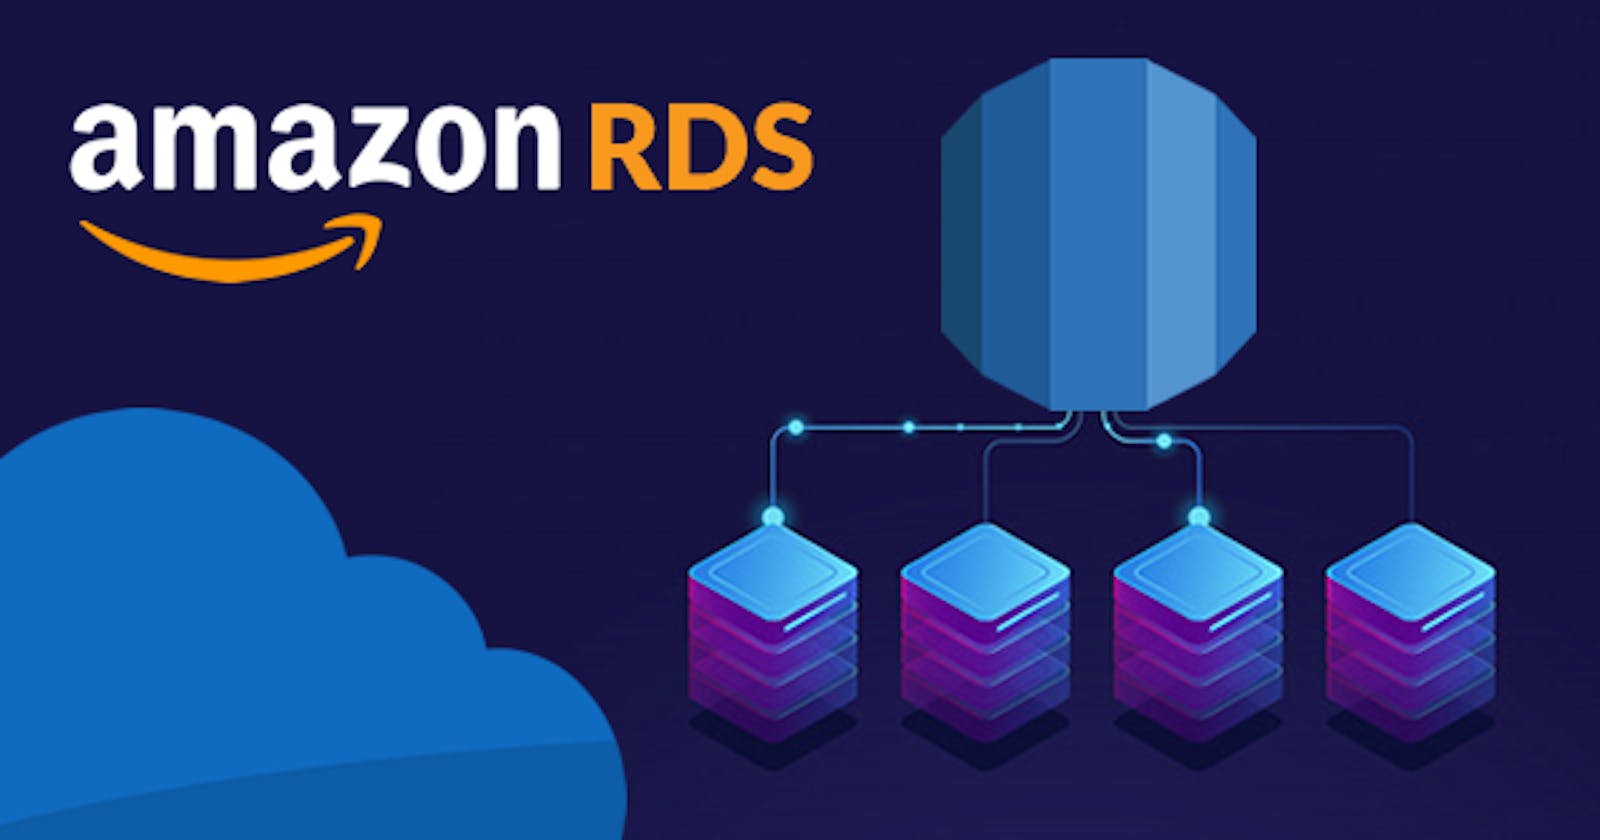 Relational Database Service in AWS